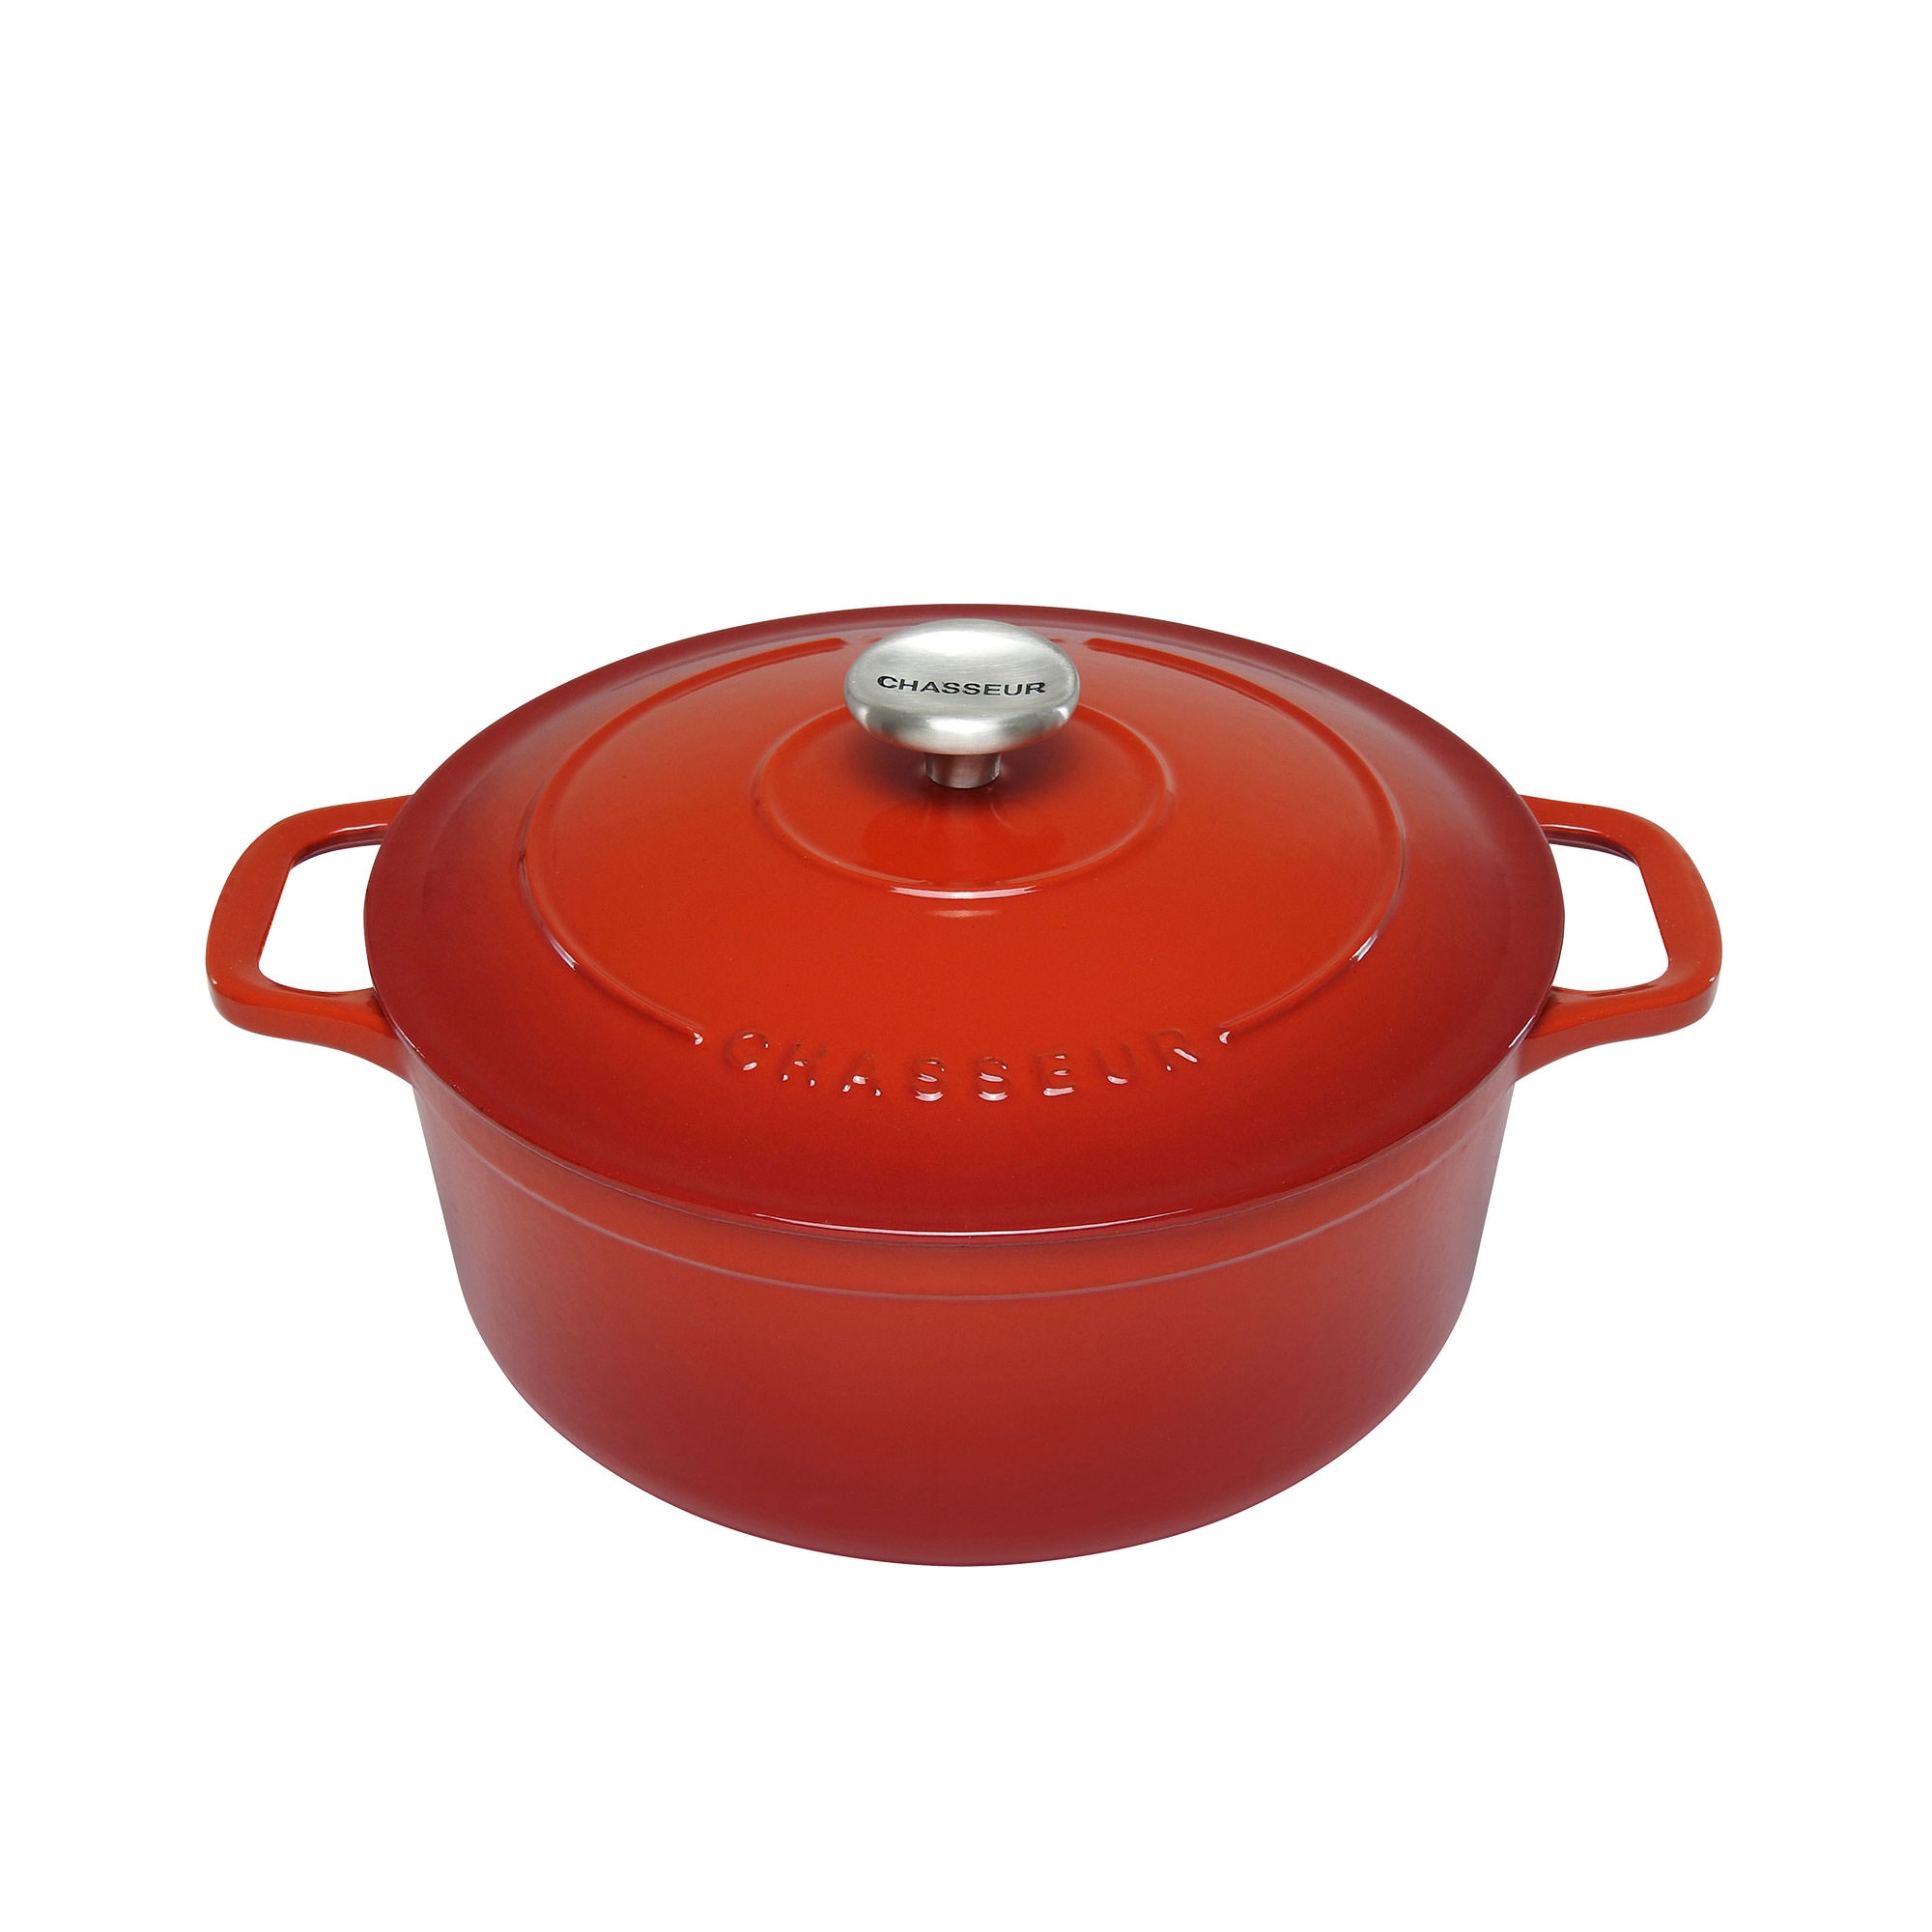 Chasseur Round French Oven 26cm - 5.2L Inferno Red Image 1